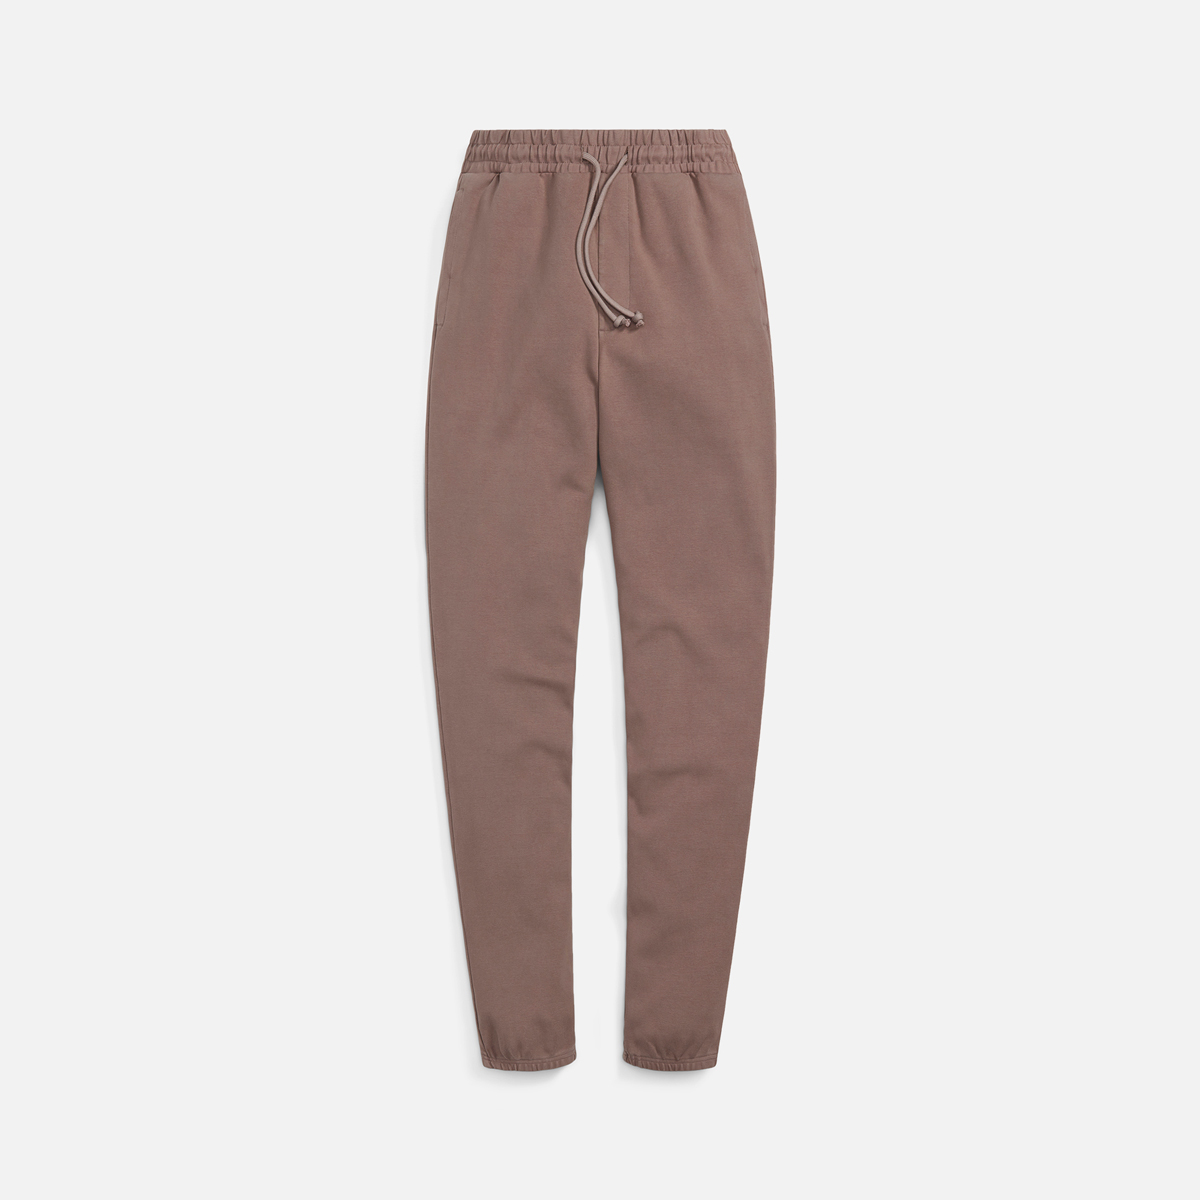 kith-fall-winter-2021-collection-bottoms-15